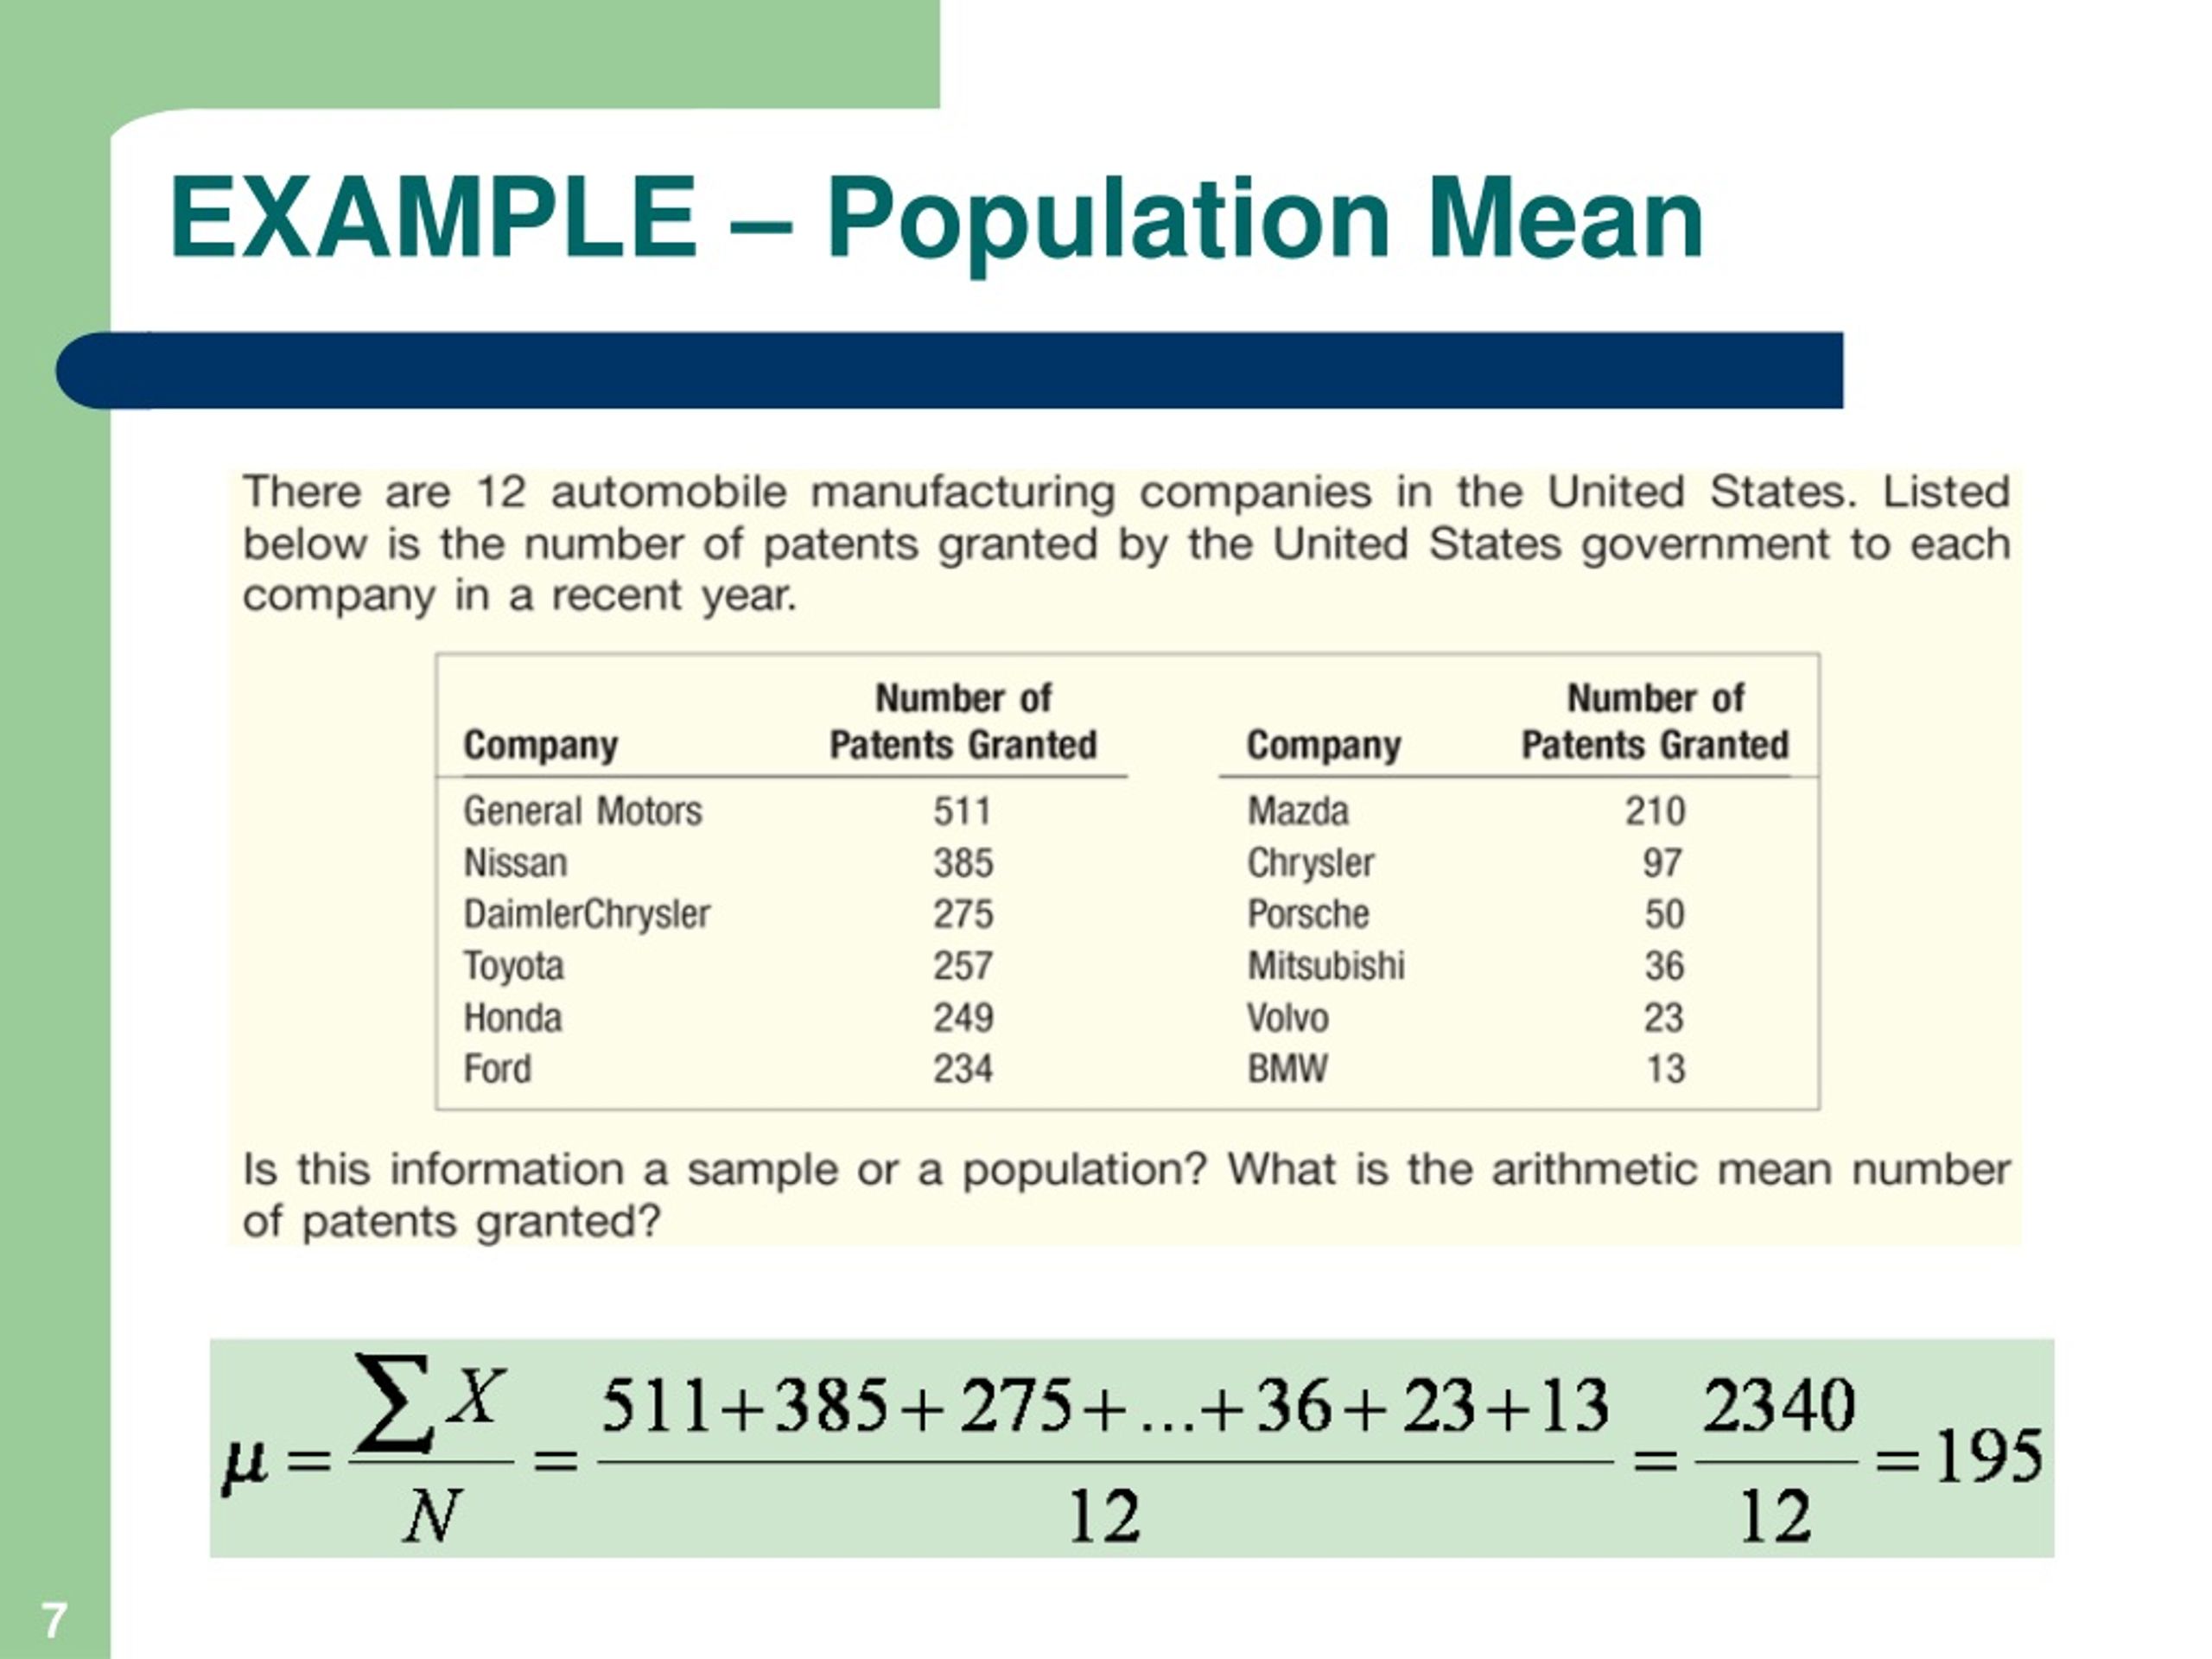 Sampling meaning. How to calculate population mean. Sampling of populations. Numerical data example. Populate meaning.